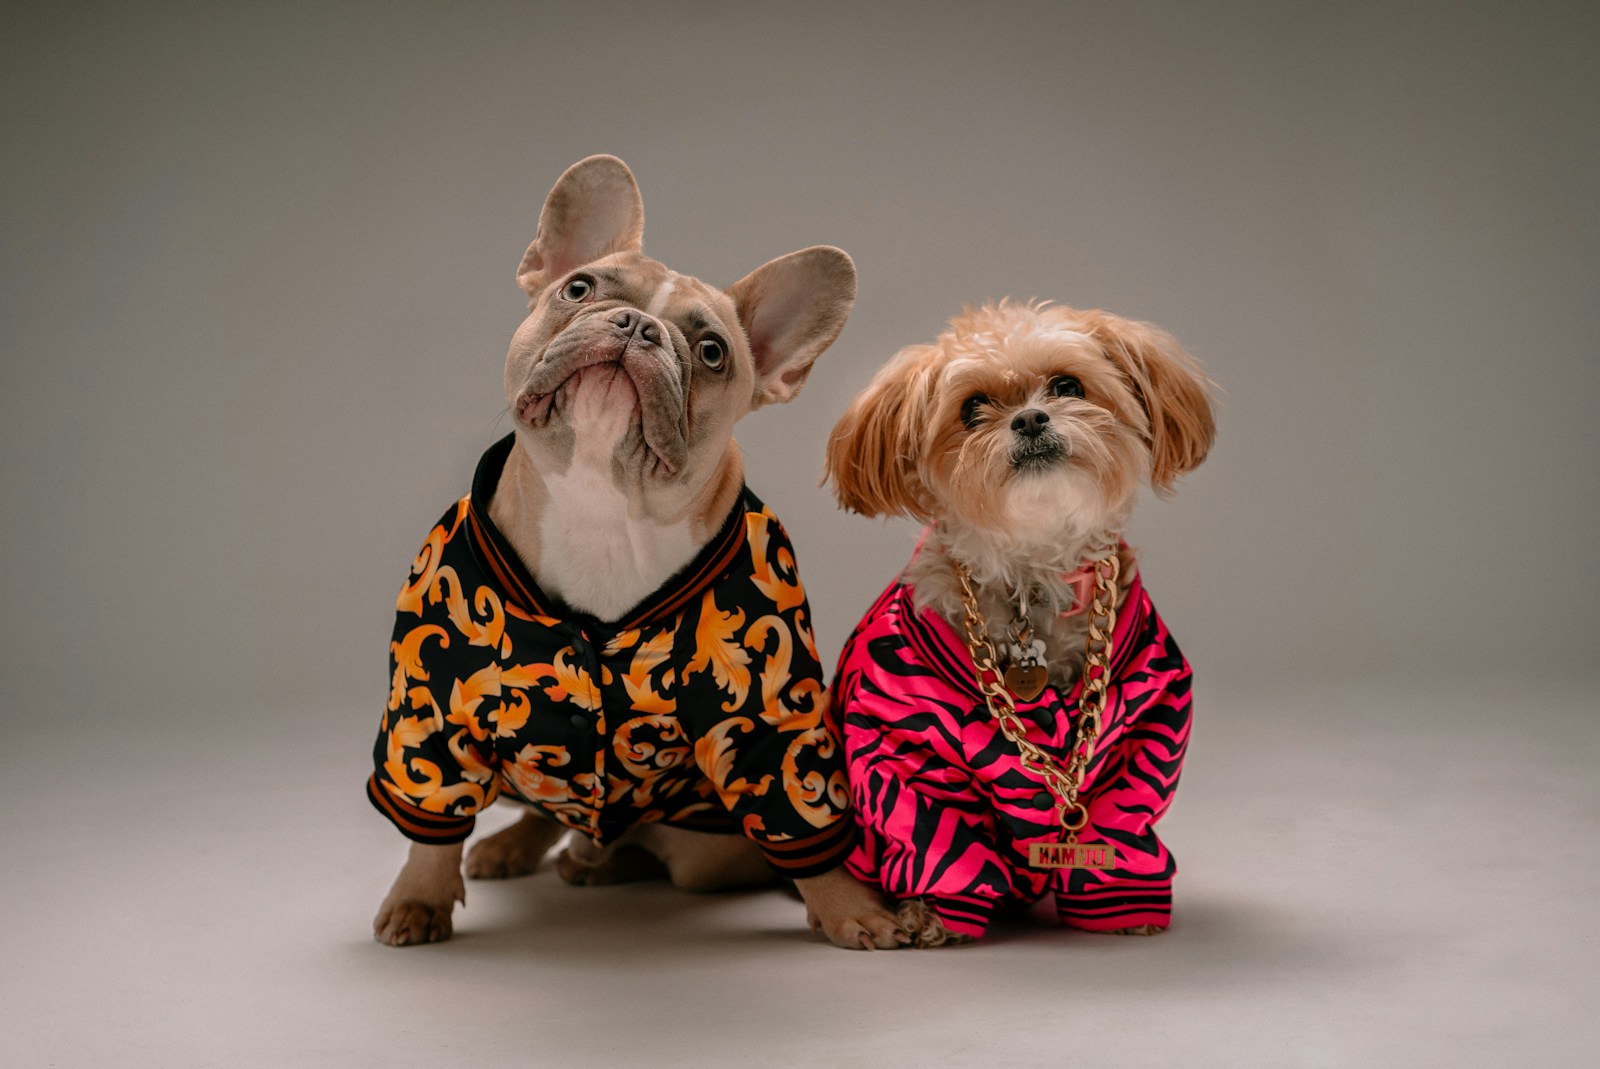 Dressing Up Your Dog: A Guide to Dog Costumes